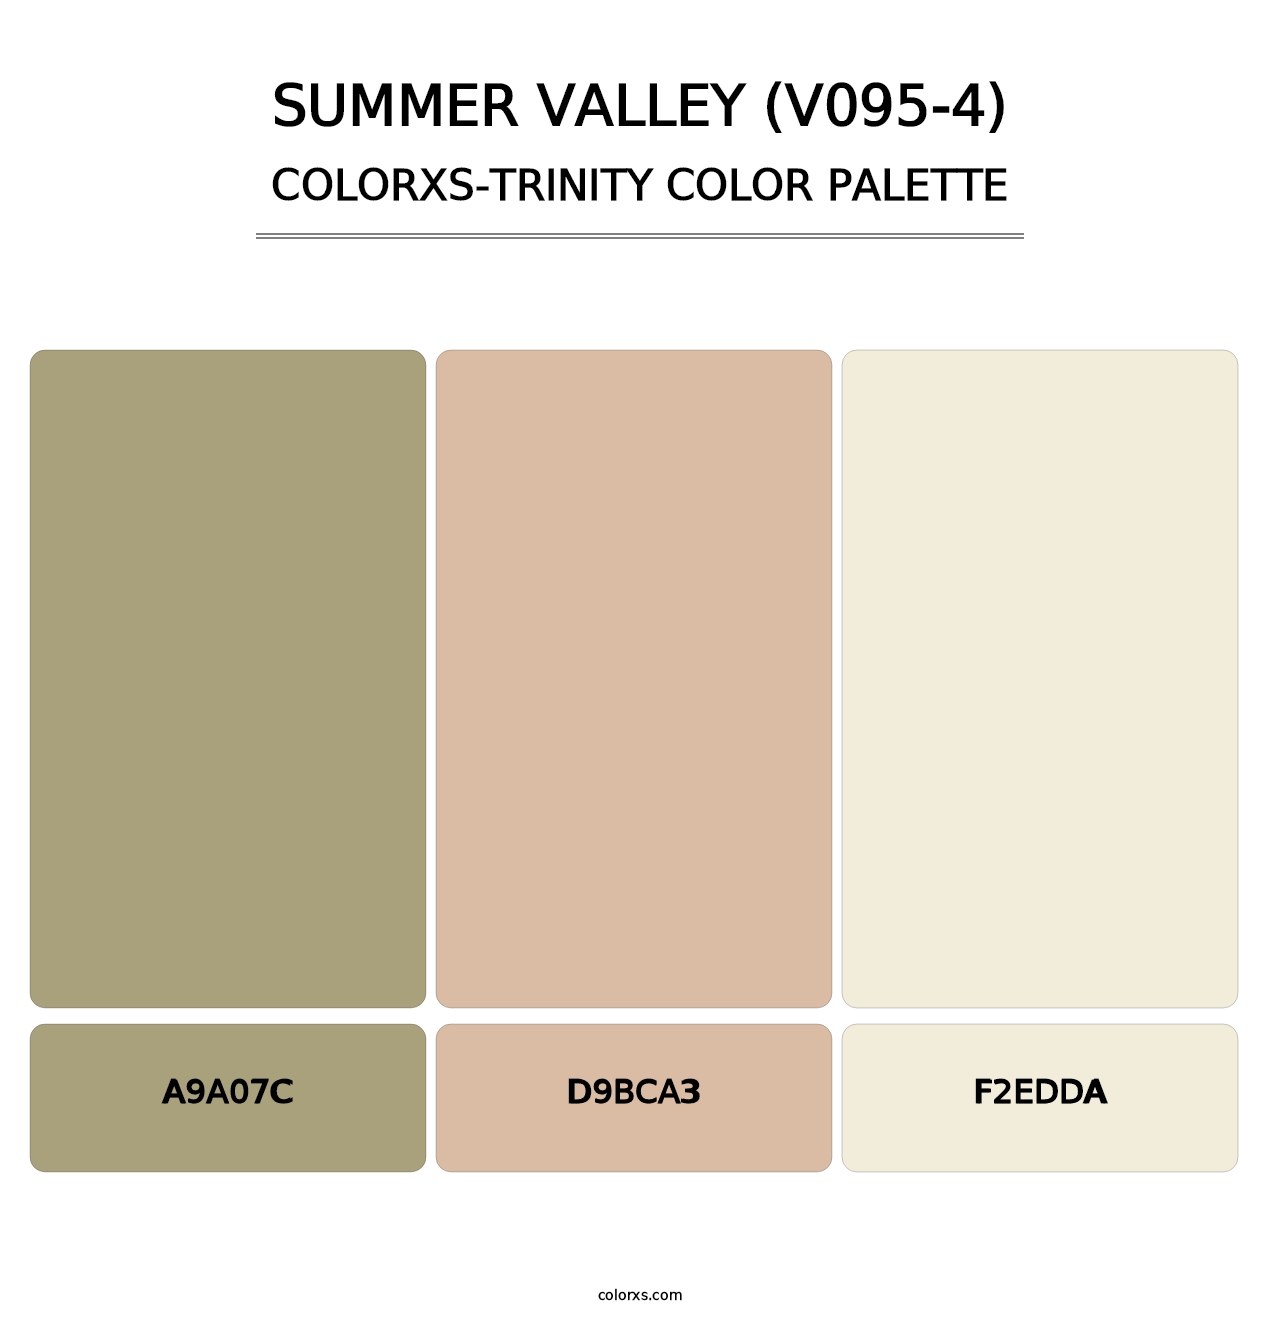 Summer Valley (V095-4) - Colorxs Trinity Palette